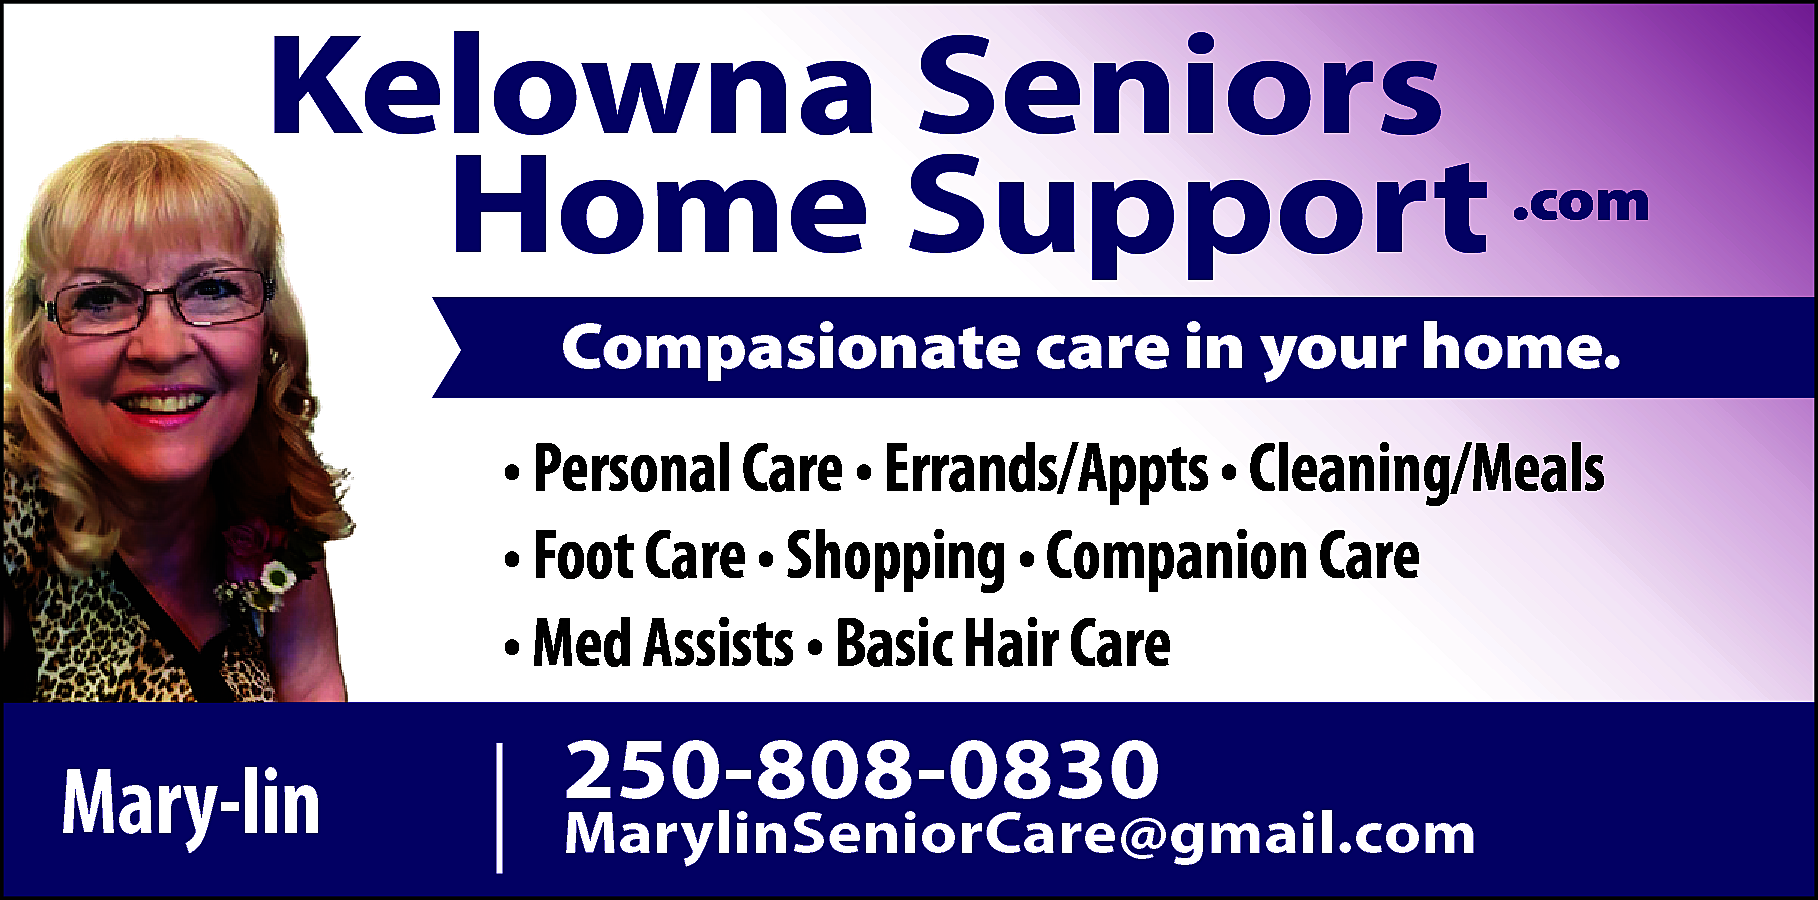 Kelowna Seniors <br>Home Support .com  Kelowna Seniors  Home Support .com  Compasionate care in your home.    • Personal Care • Errands/Appts • Cleaning/Meals  • Foot Care • Shopping • Companion Care  • Med Assists • Basic Hair Care    Mary-lin    250-808-0830    MarylinSeniorCare@gmail.com    